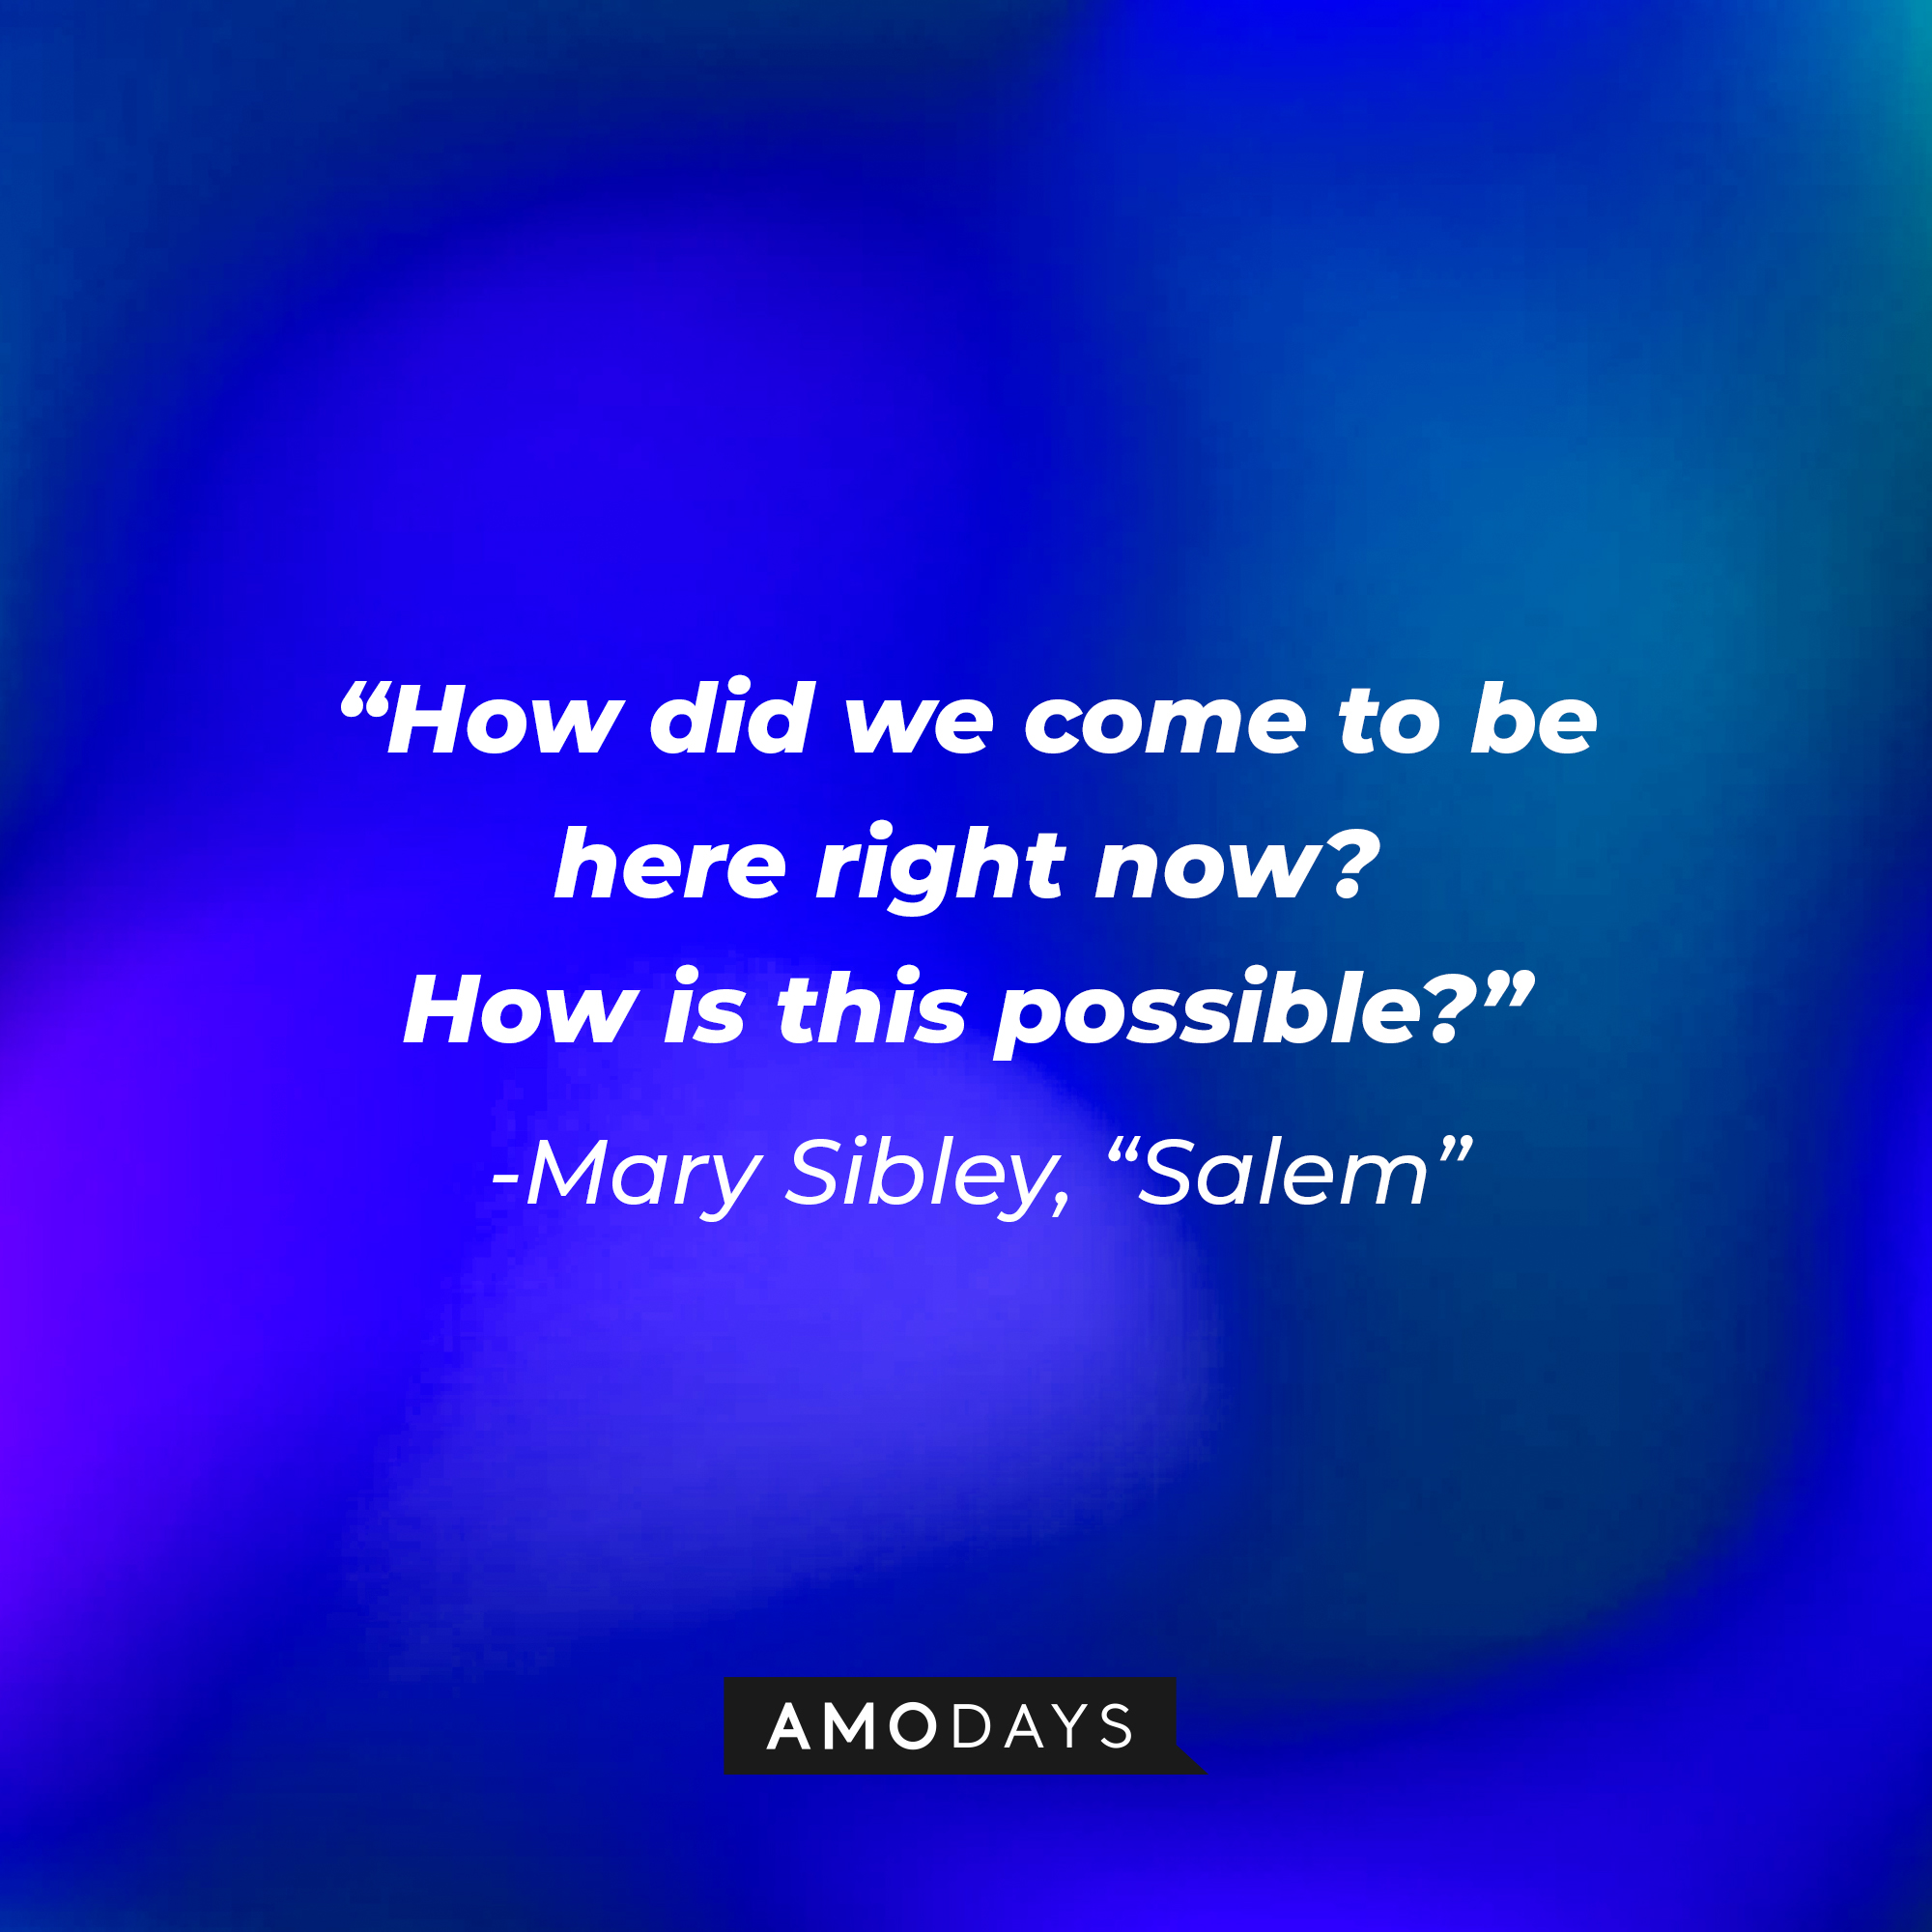 Mary Sibley's quote: "How did we come to be here right now? How is this possible?" | Source: Amodays